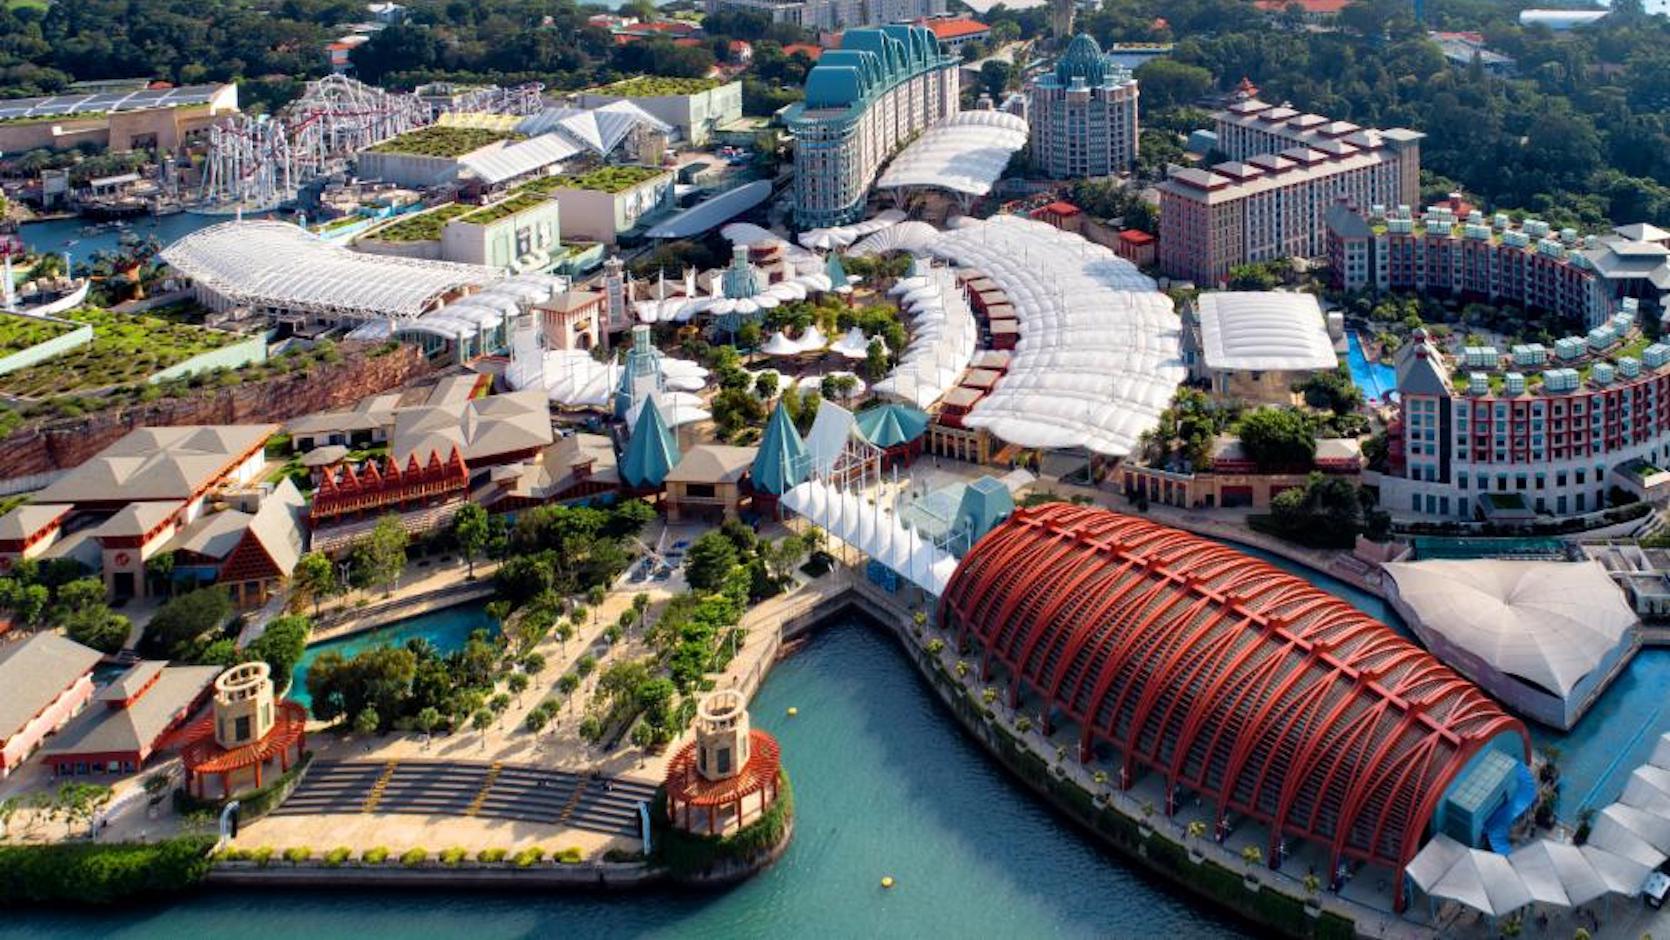 Attractions & Things To Do in Sentosa - Visit Singapore Official Site